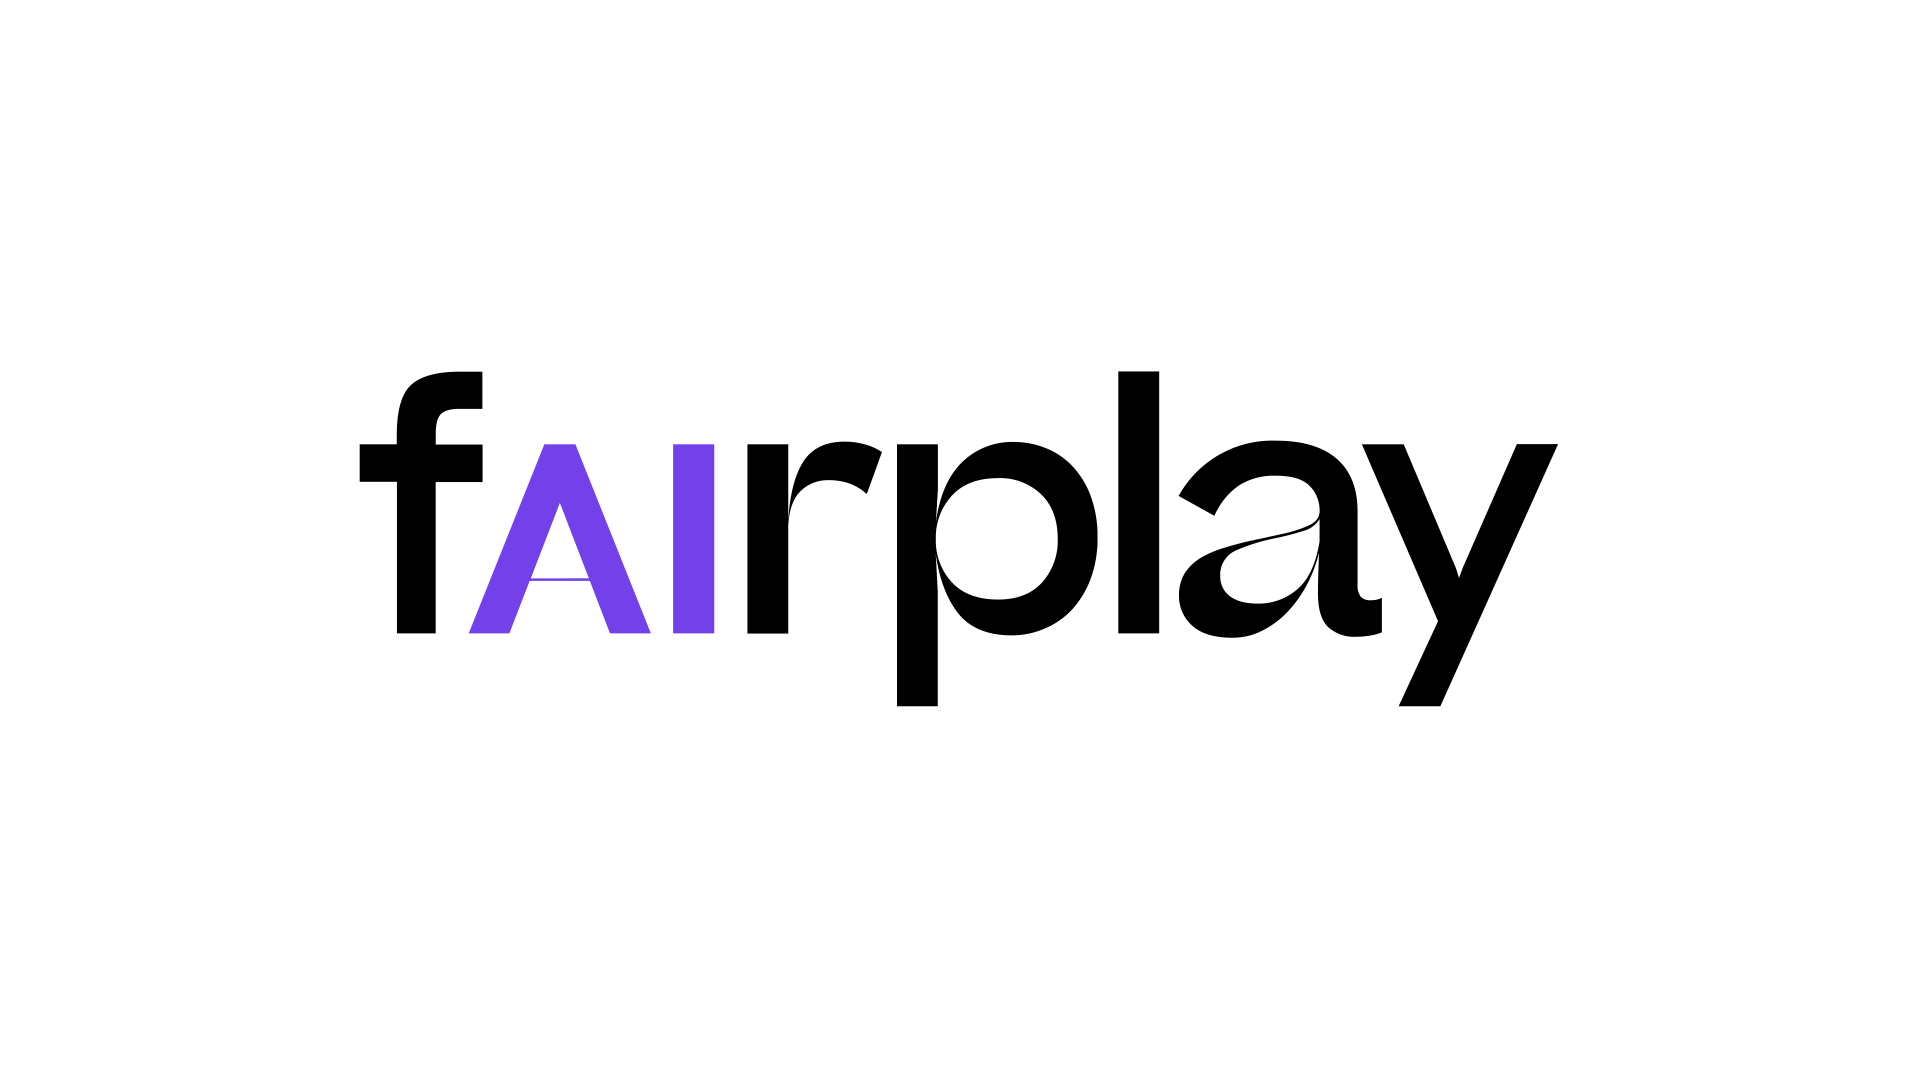 FairPlay Launches AI Bias Detection Product for the Insurance Industry